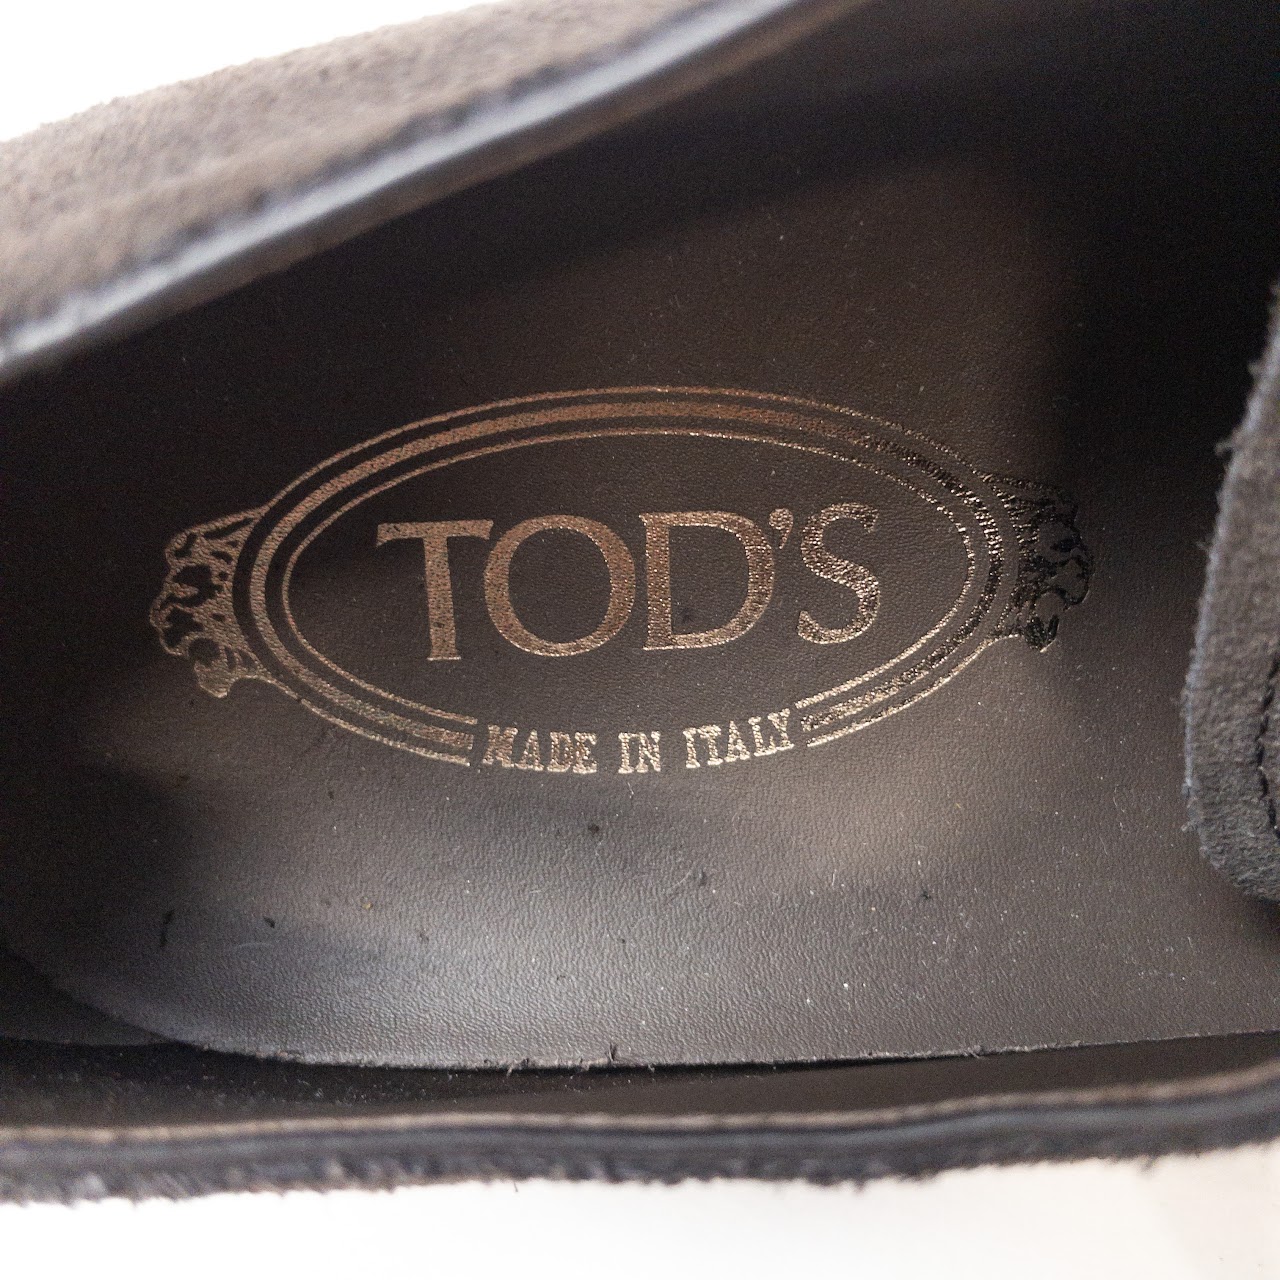 Tod's Suede Derby Shoes